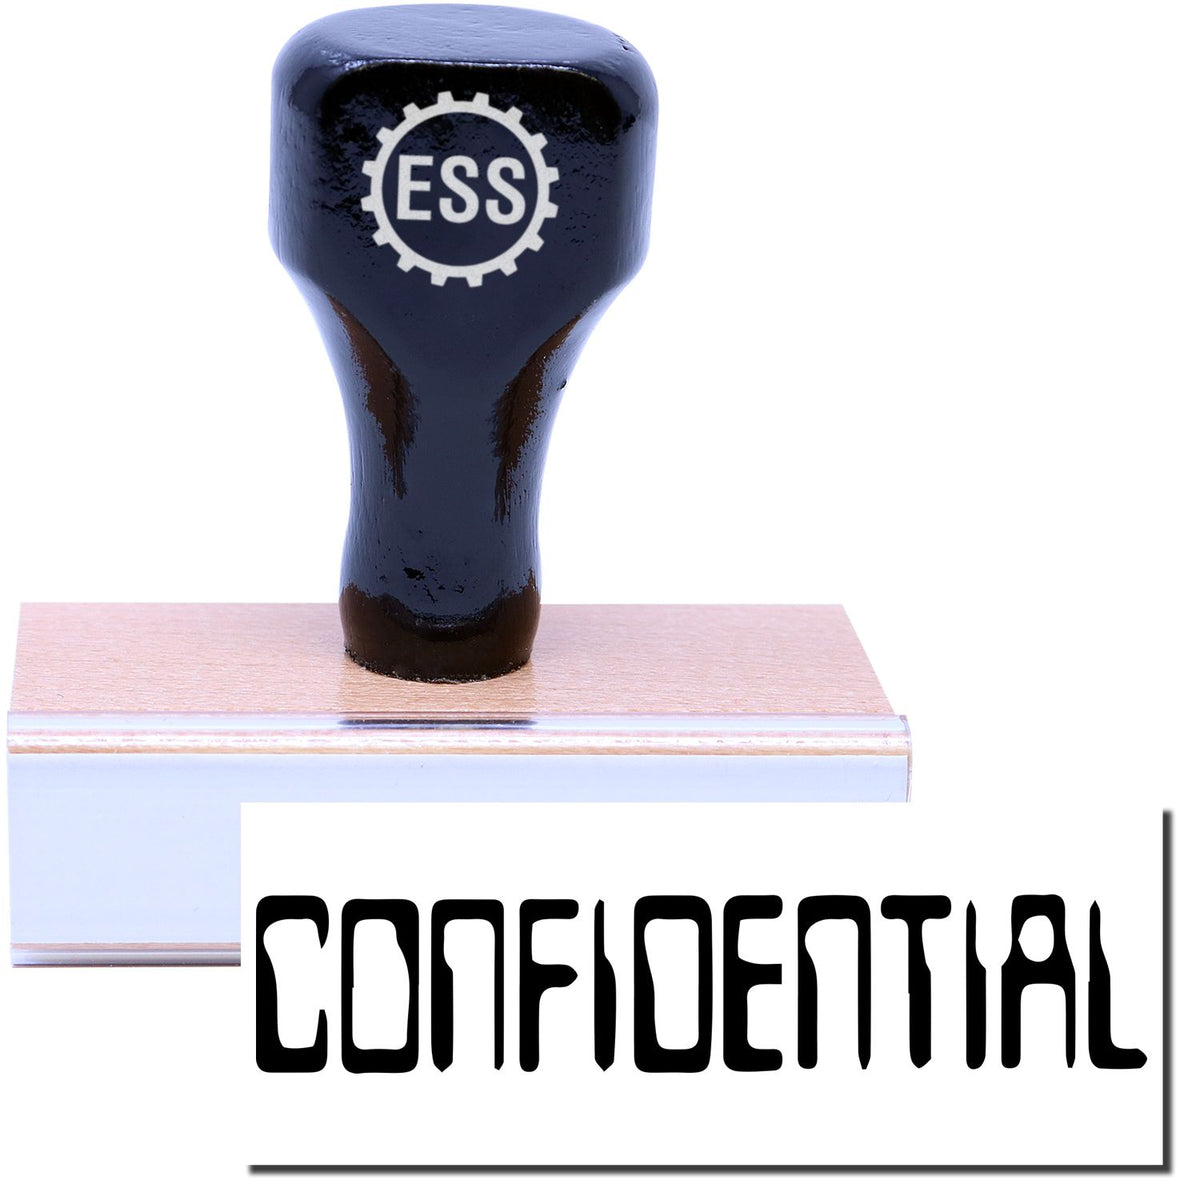 A stock office rubber stamp with a stamped image showing how the text &quot;CONFIDENTIAL&quot; in a large barcode font is displayed after stamping.